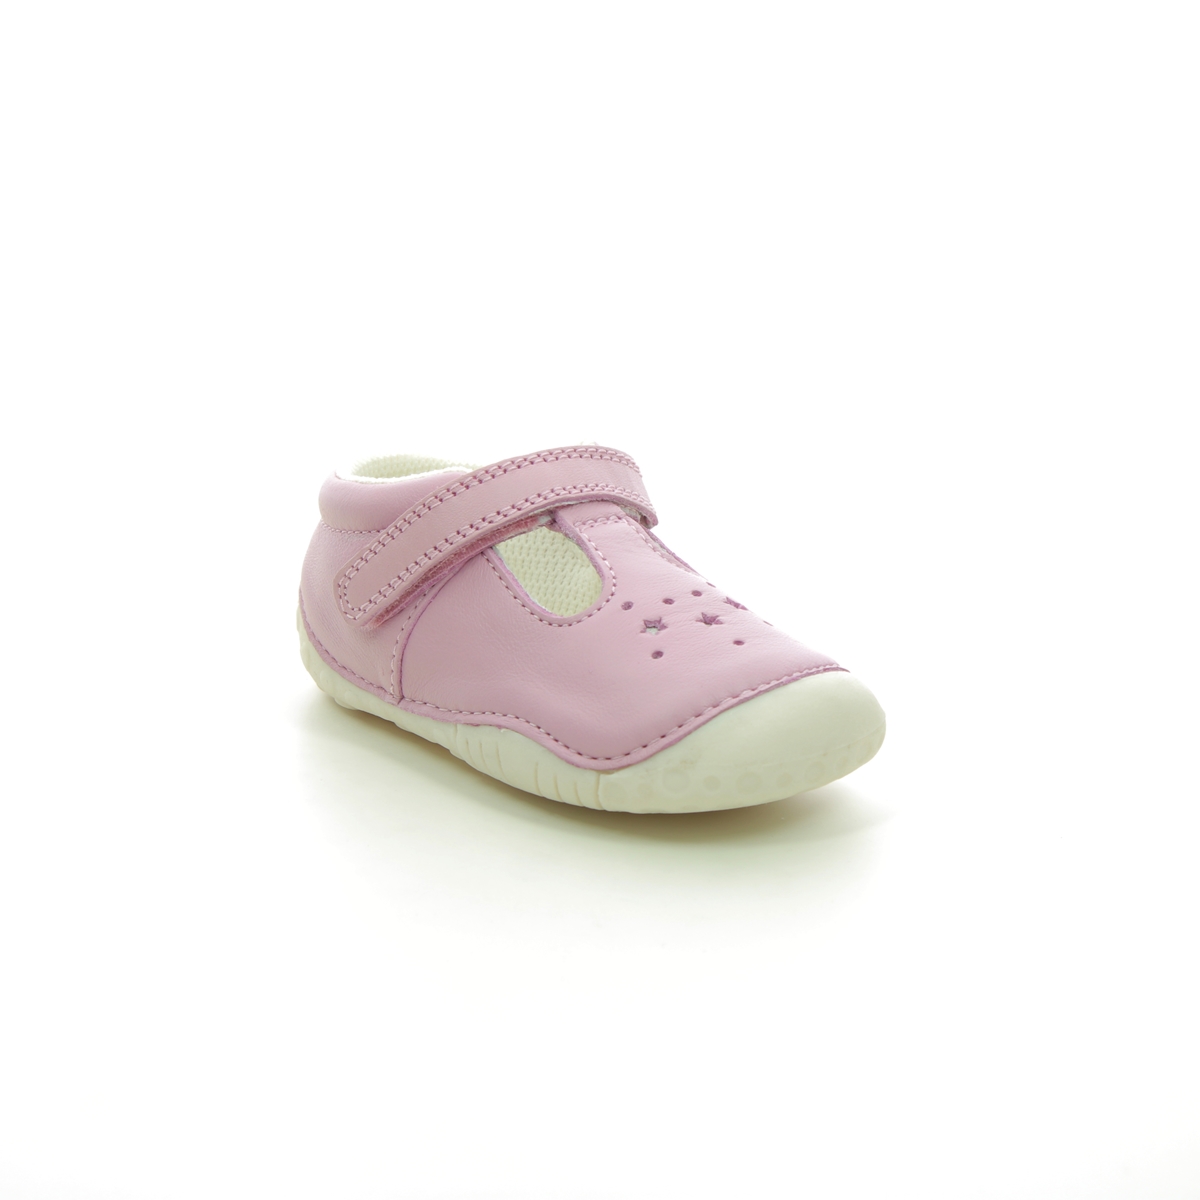 Start Rite Tumble T Bar Pink Leather Kids girls first and baby shoes 0761-67G in a Plain Leather in Size 2